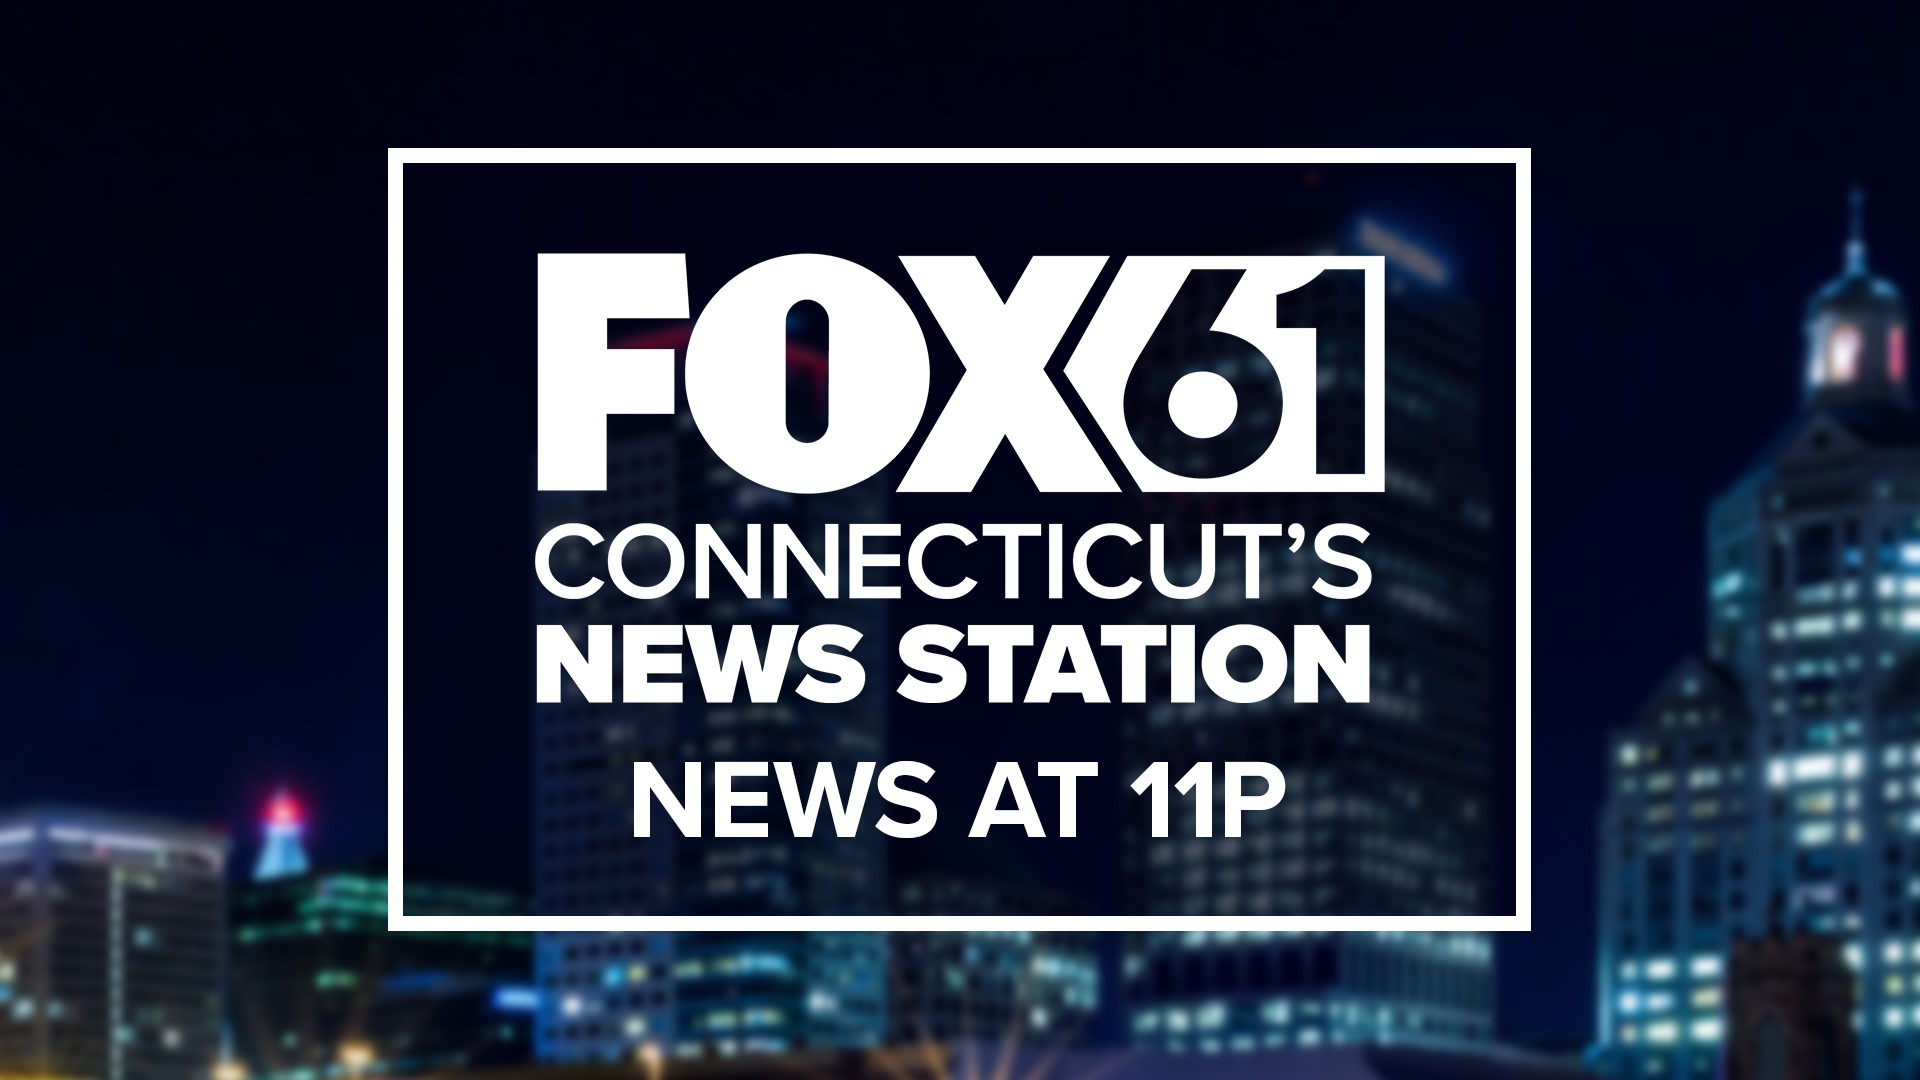 FOX61 News at 11P with Sara Sanchez, Brent Hardin and Chief Meteorologist Rachel Frank covers Connecticut, the nation and the world.